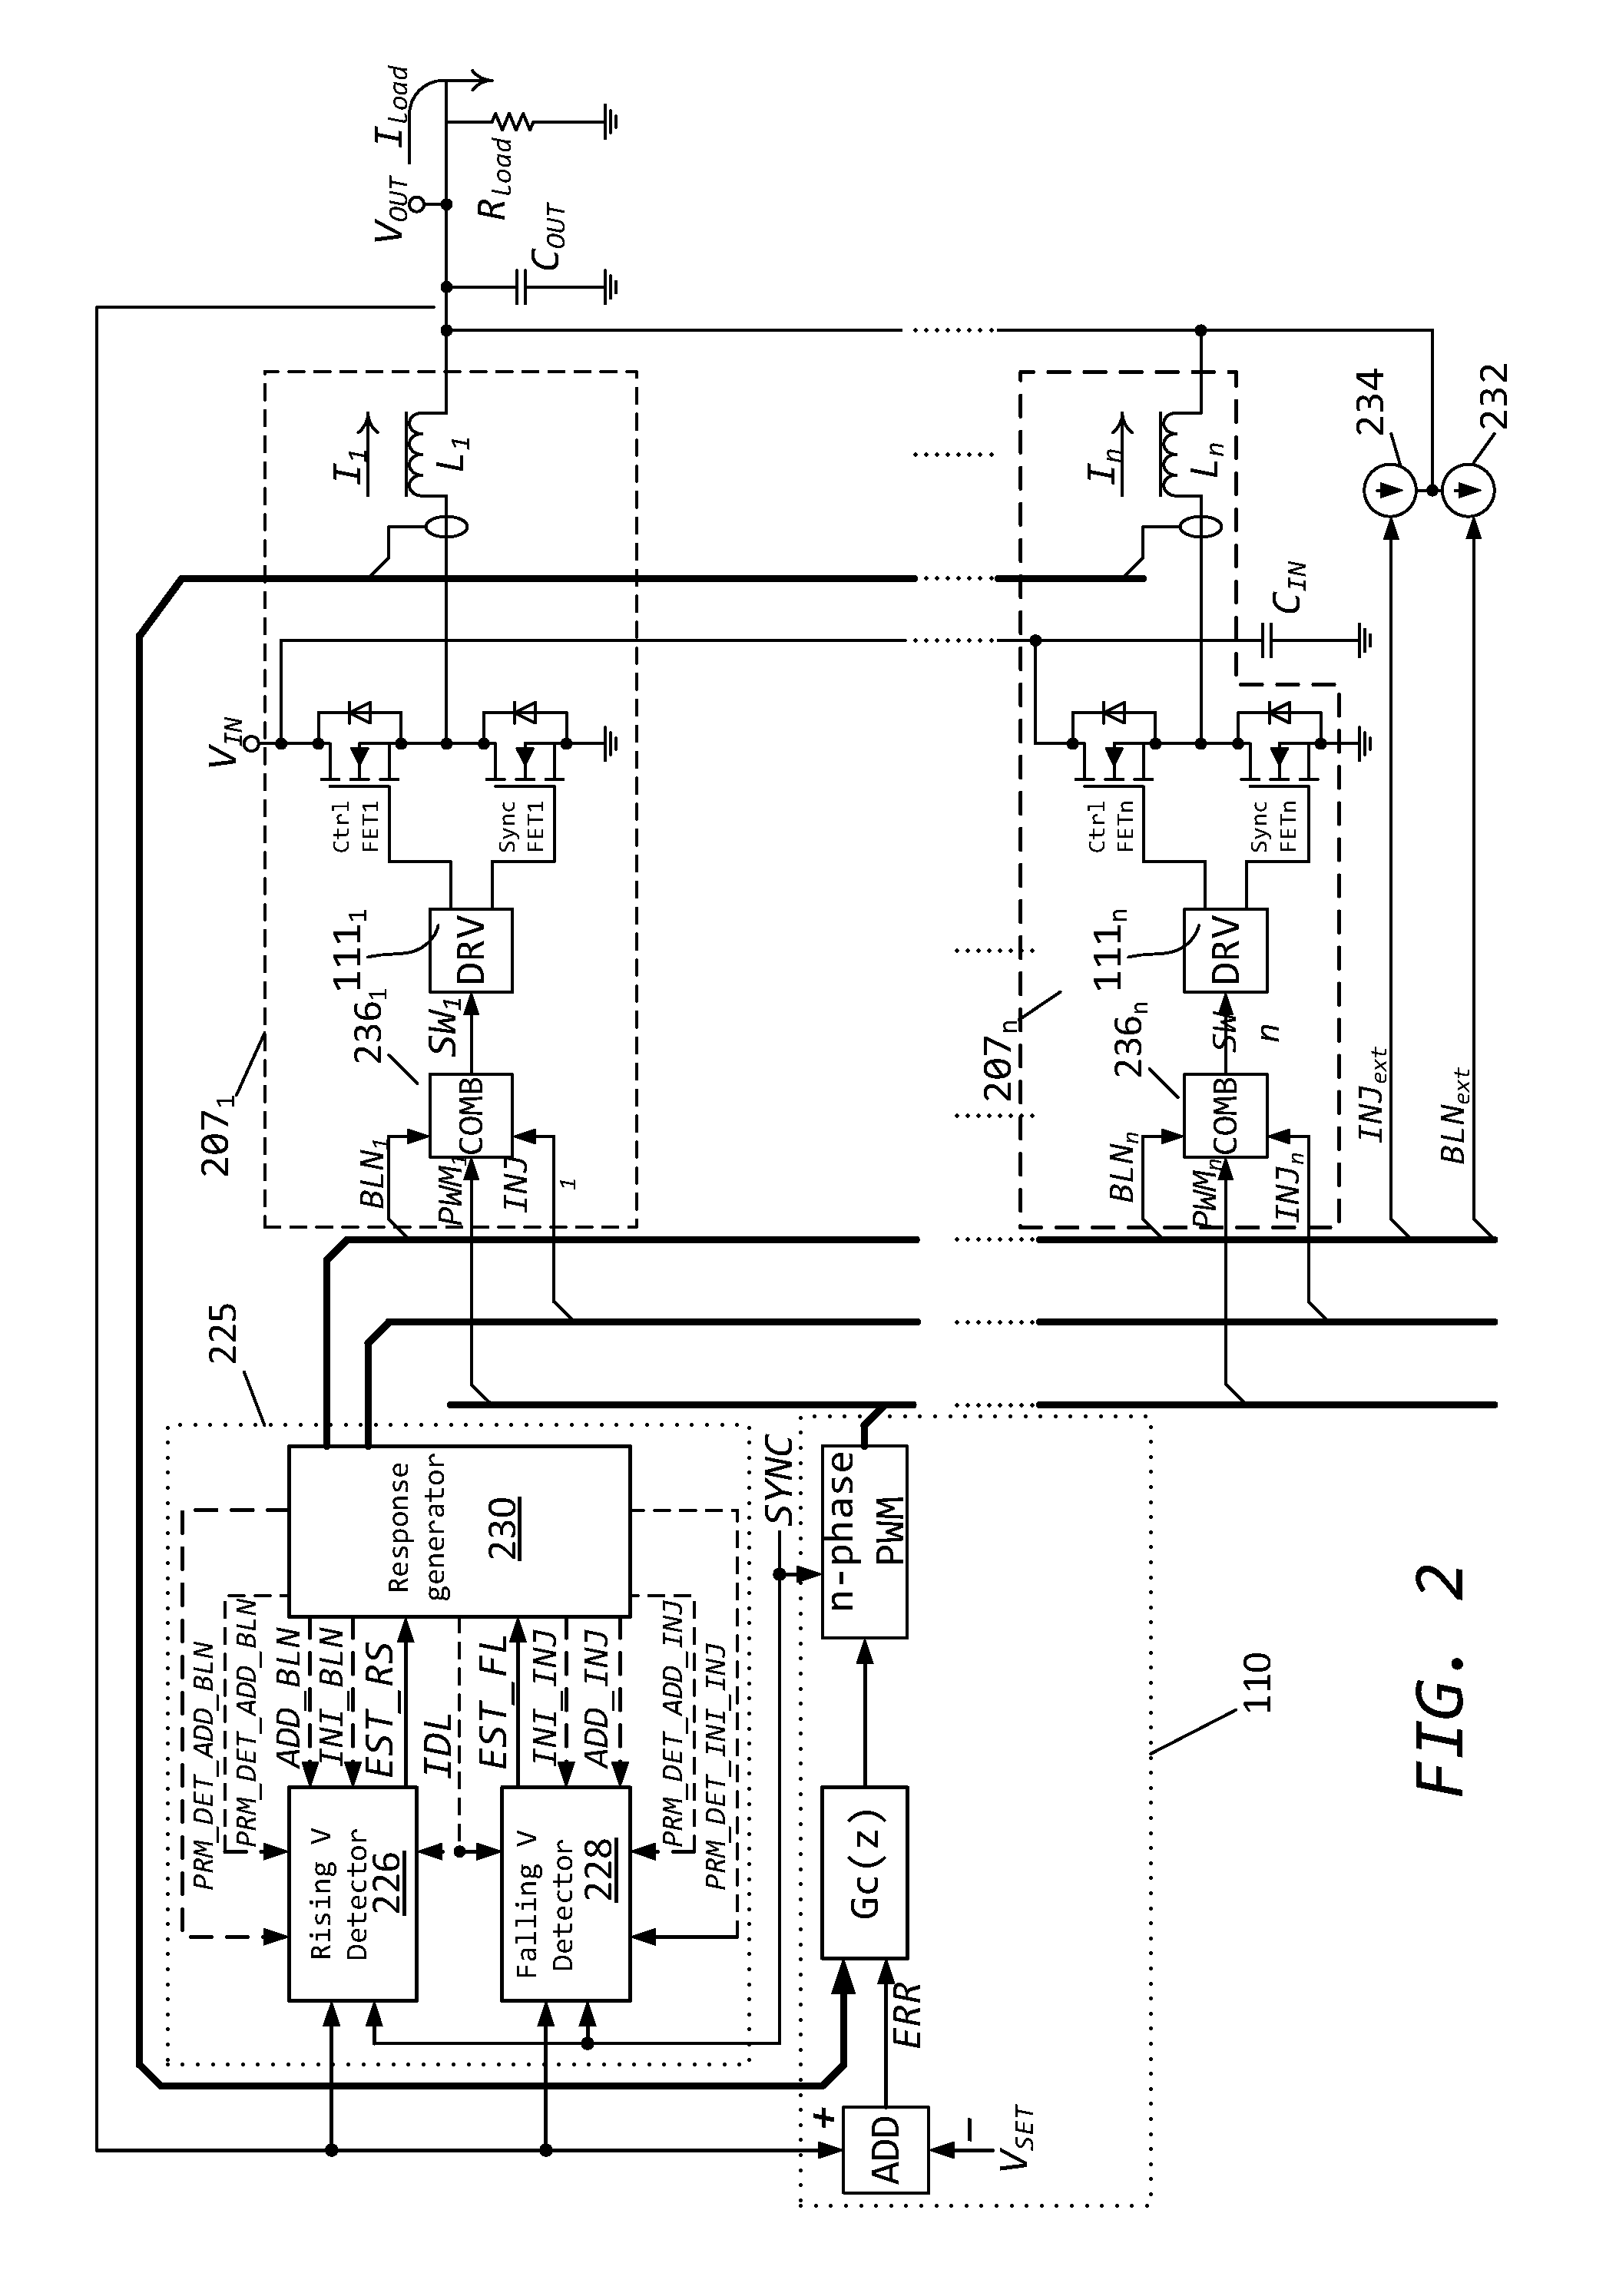 Method for controlling a dc-to-dc converter